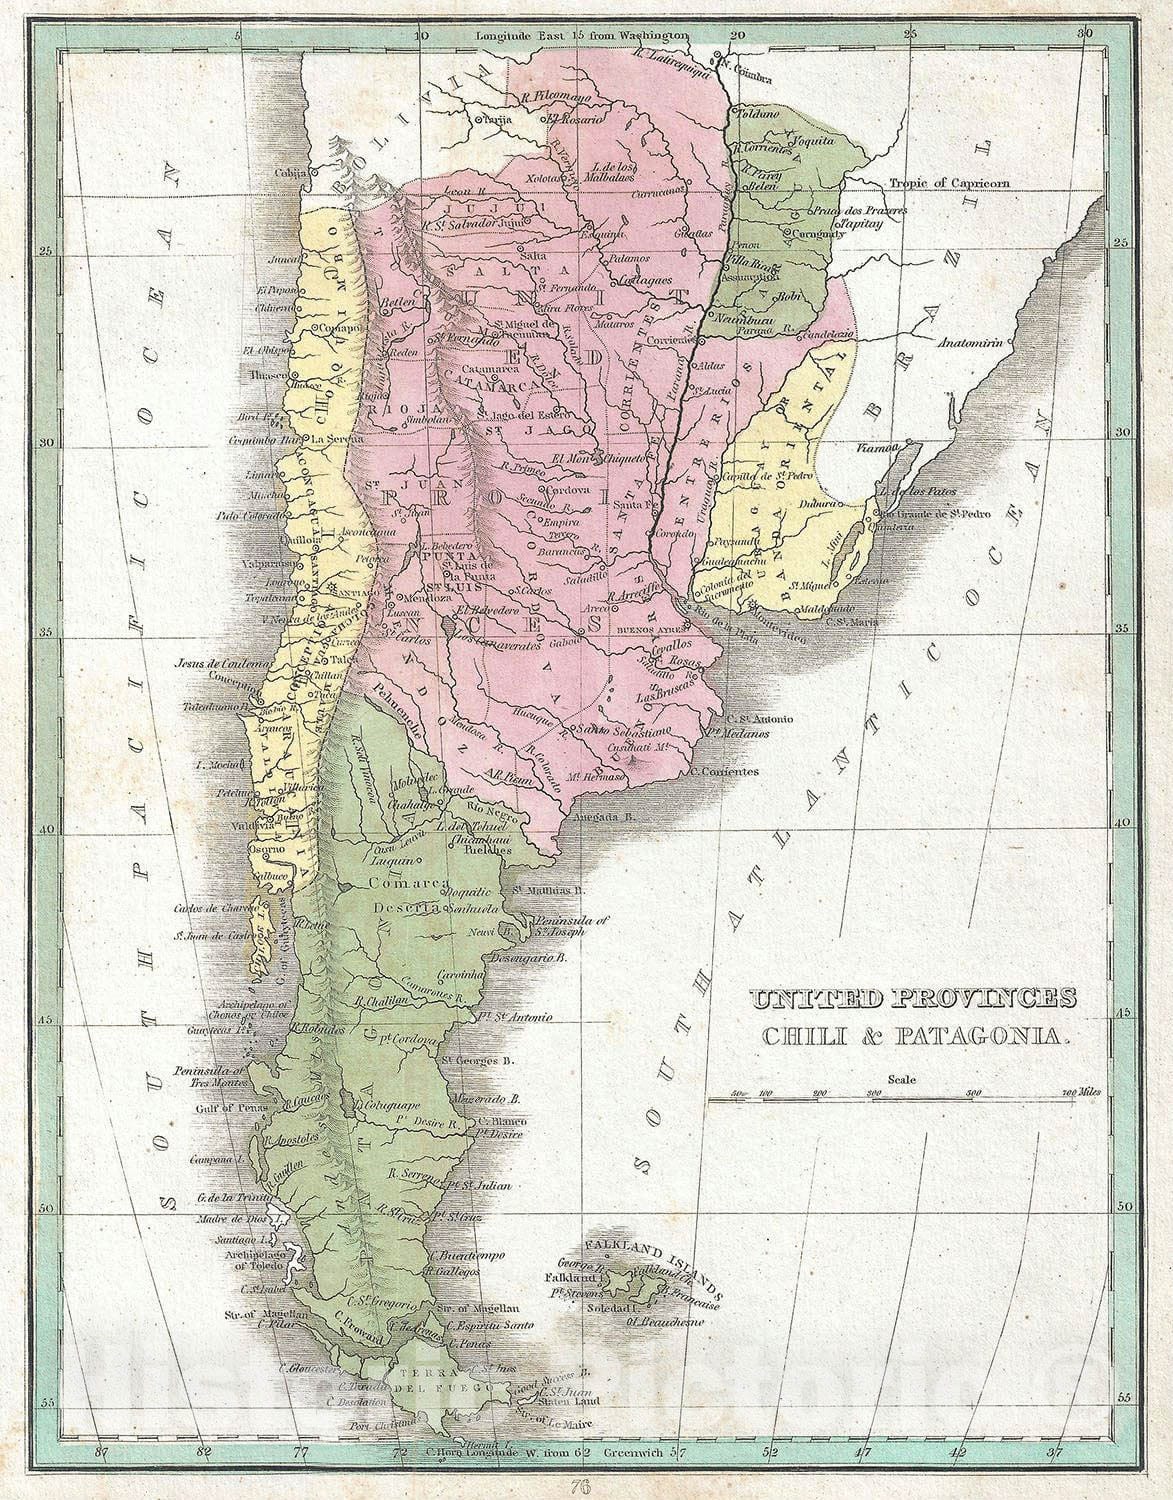 Historic Map : Chile, Argentina, Uruguay and Paraguay, BraArtd, 1835, Vintage Wall Art